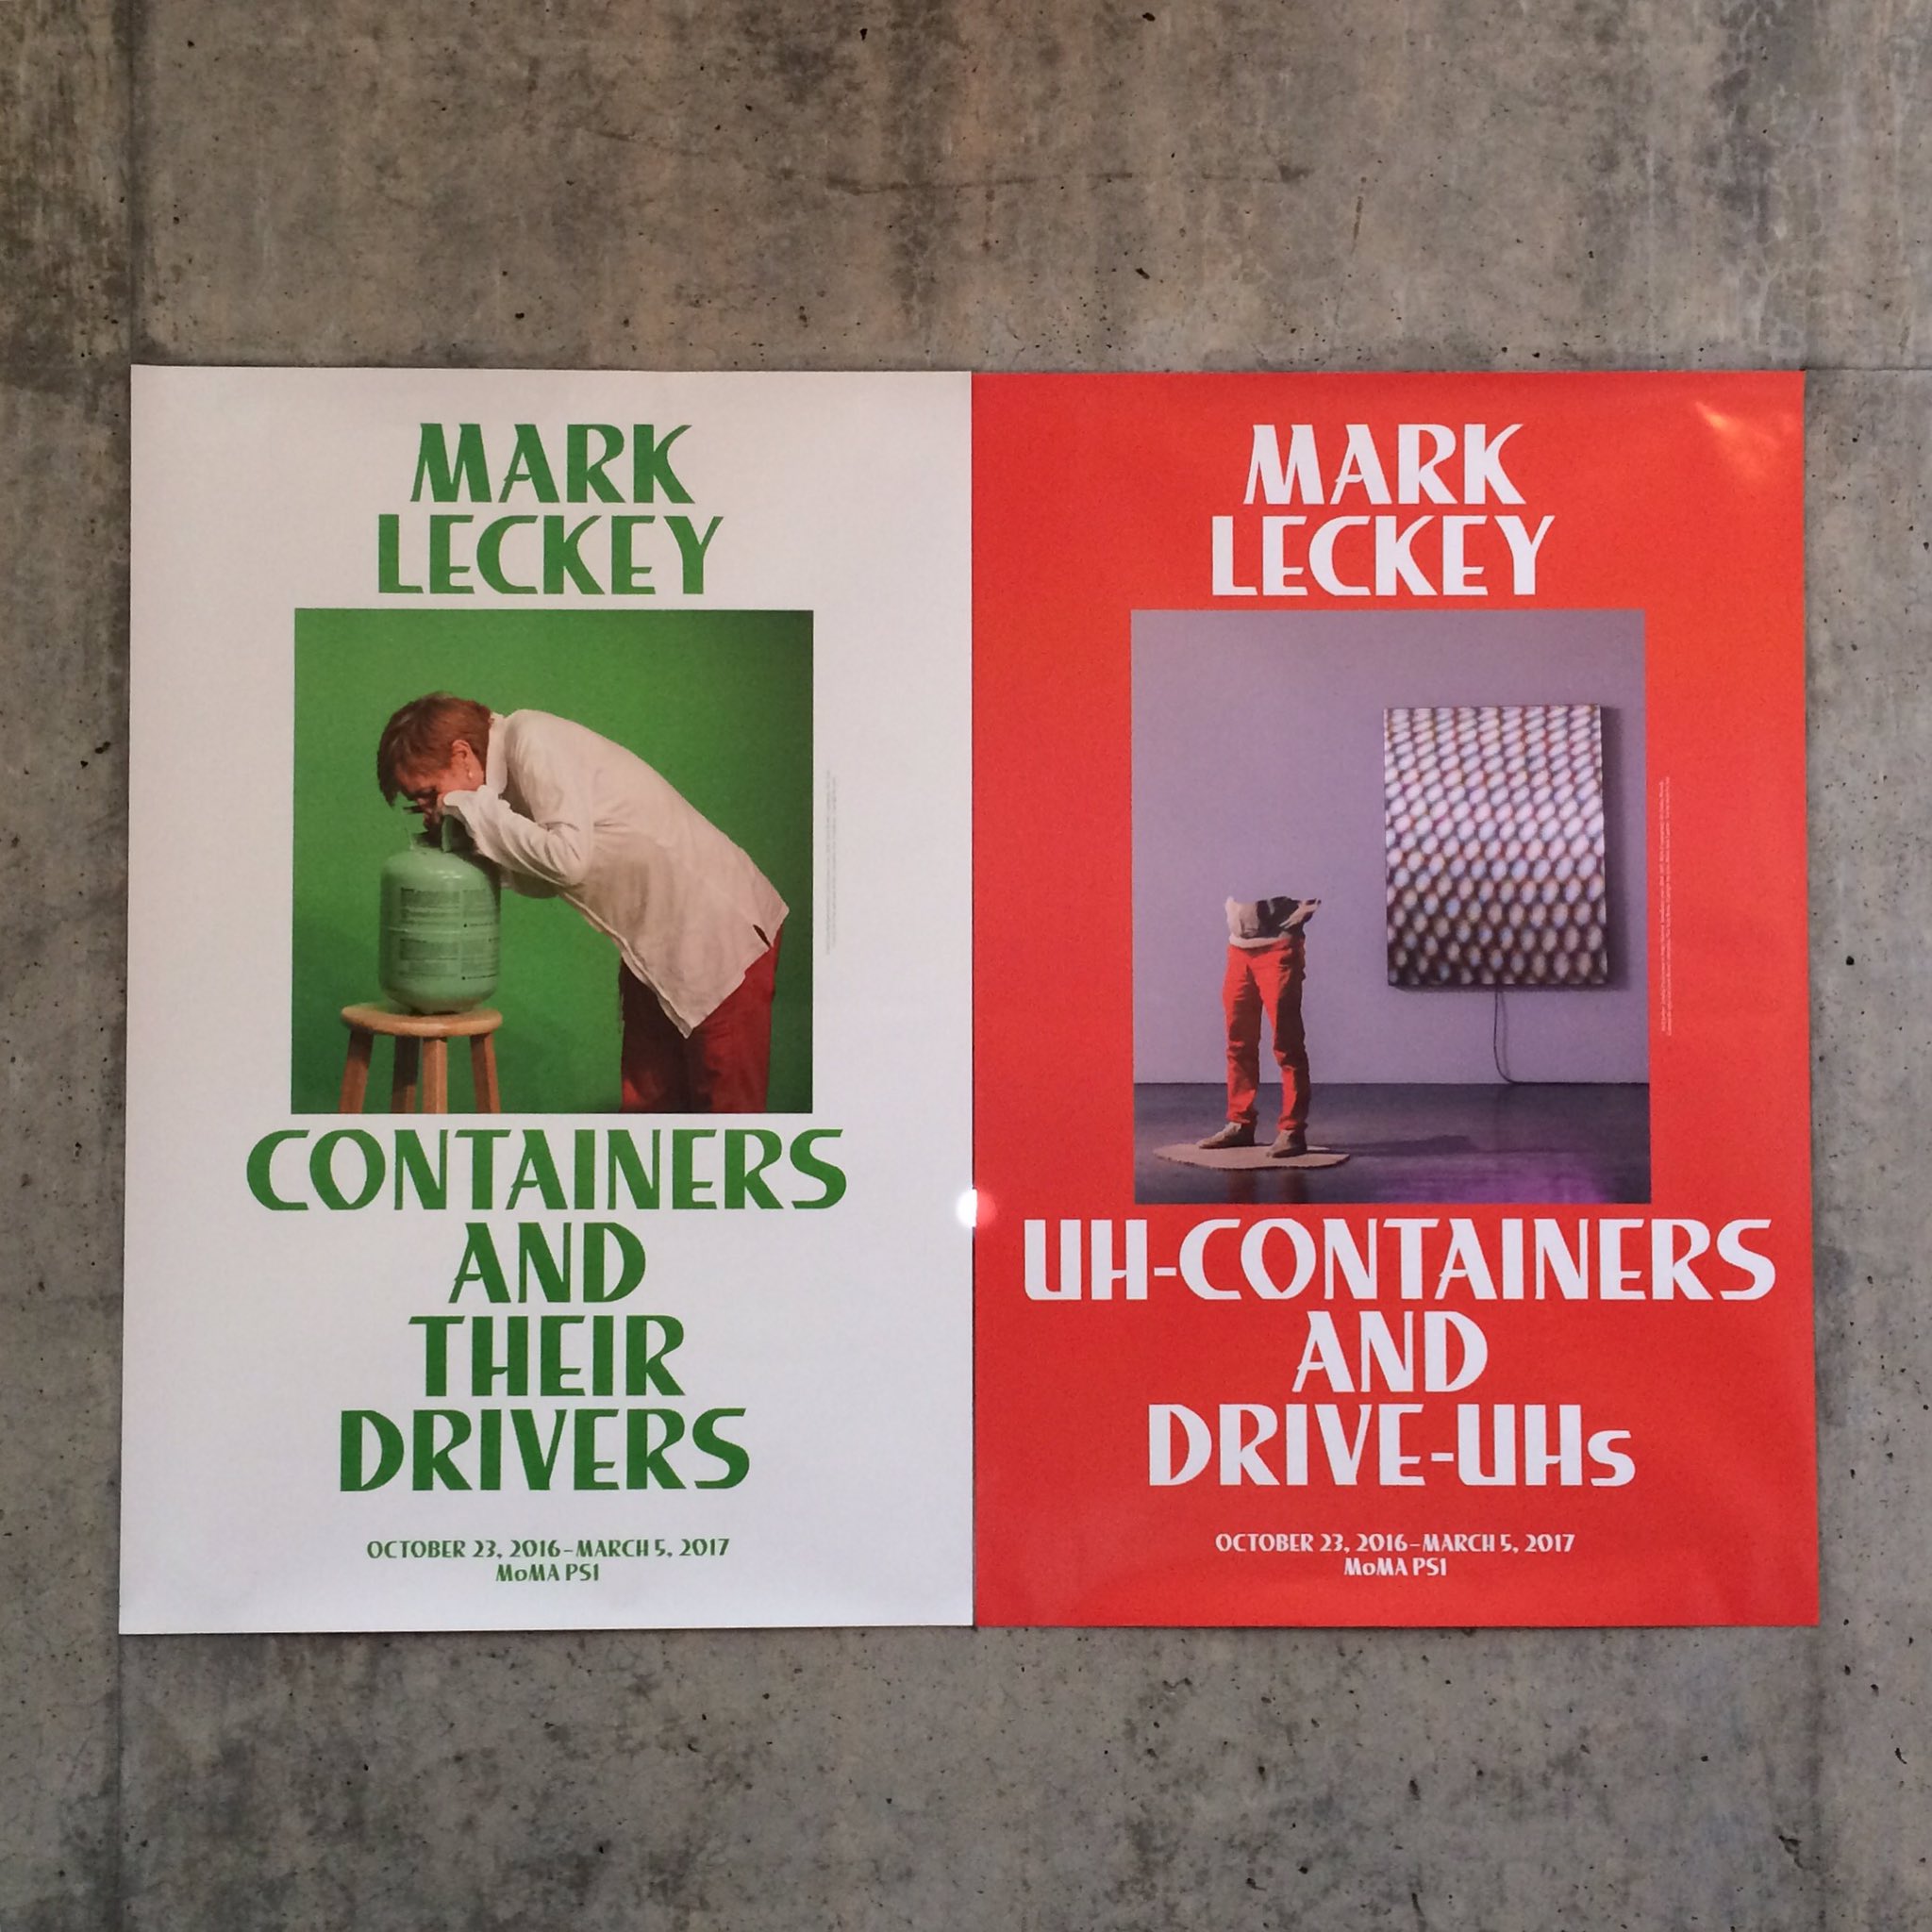 Artbook @ MoMA PS1 on Twitter: "Mark Leckey's and Their Drivers" is on view at MoMA PS1 thru March. Posters are on sale in the Bookstore & Magazine Store now! https://t.co/22Uq7wLjBd" /